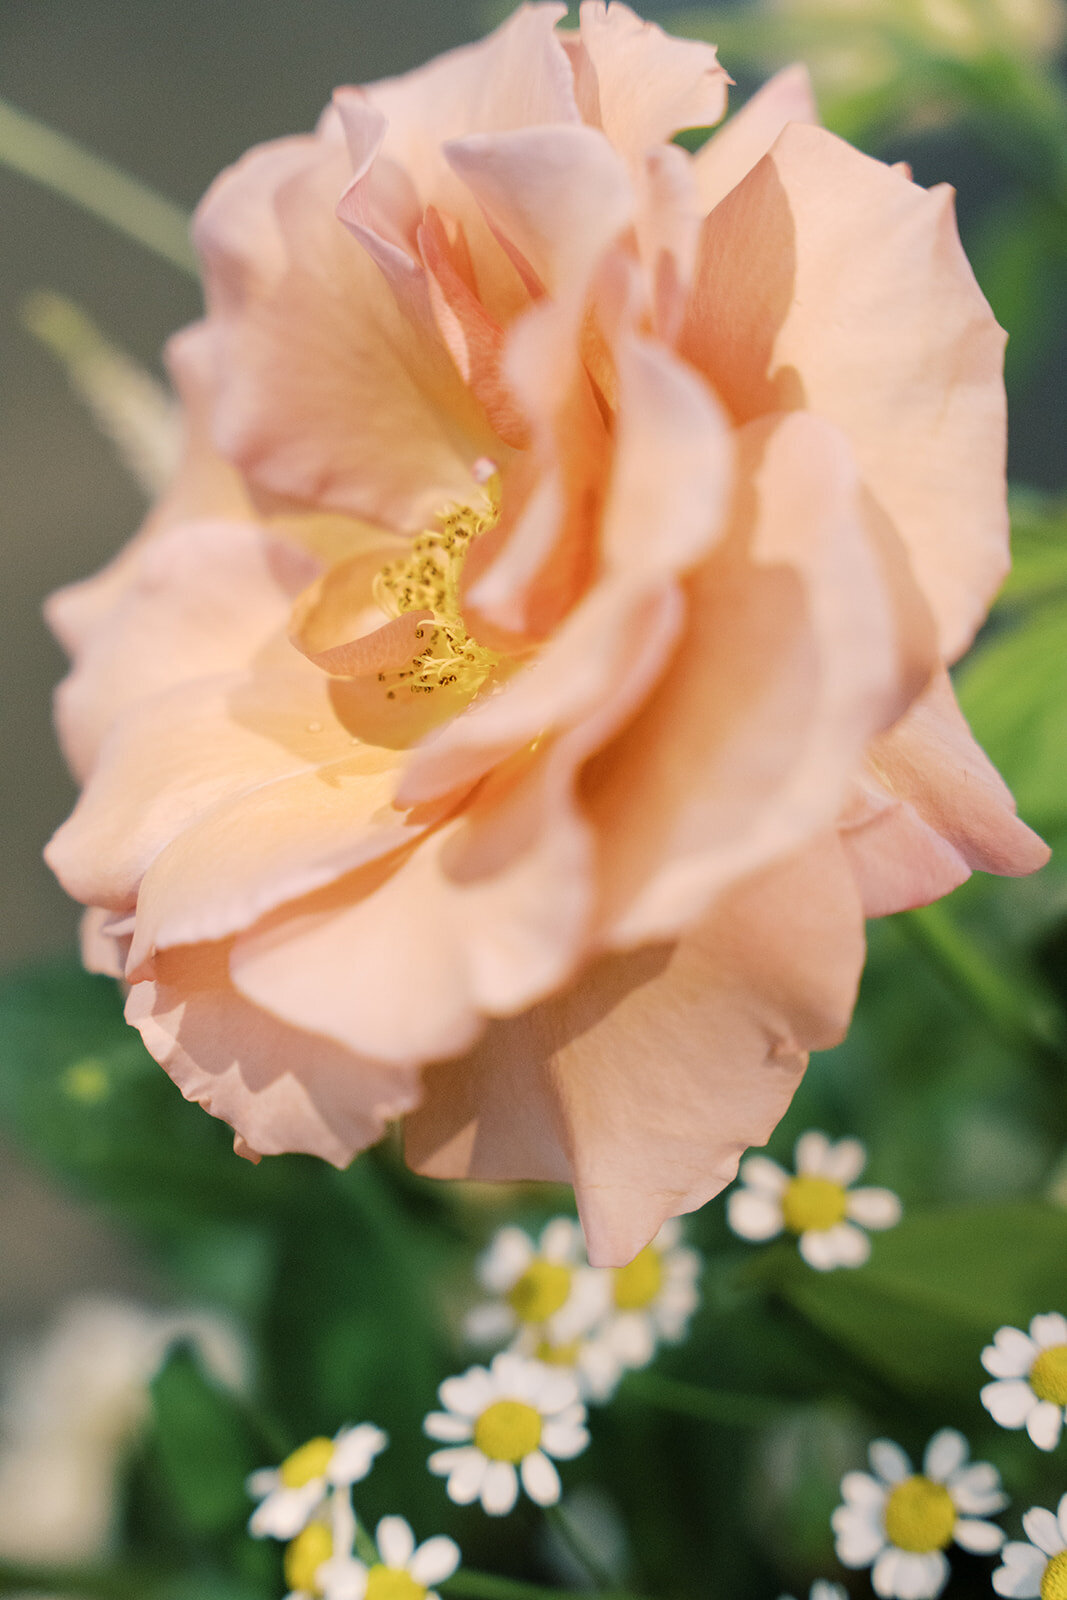 Peach rose with greenery and daisies in the background.